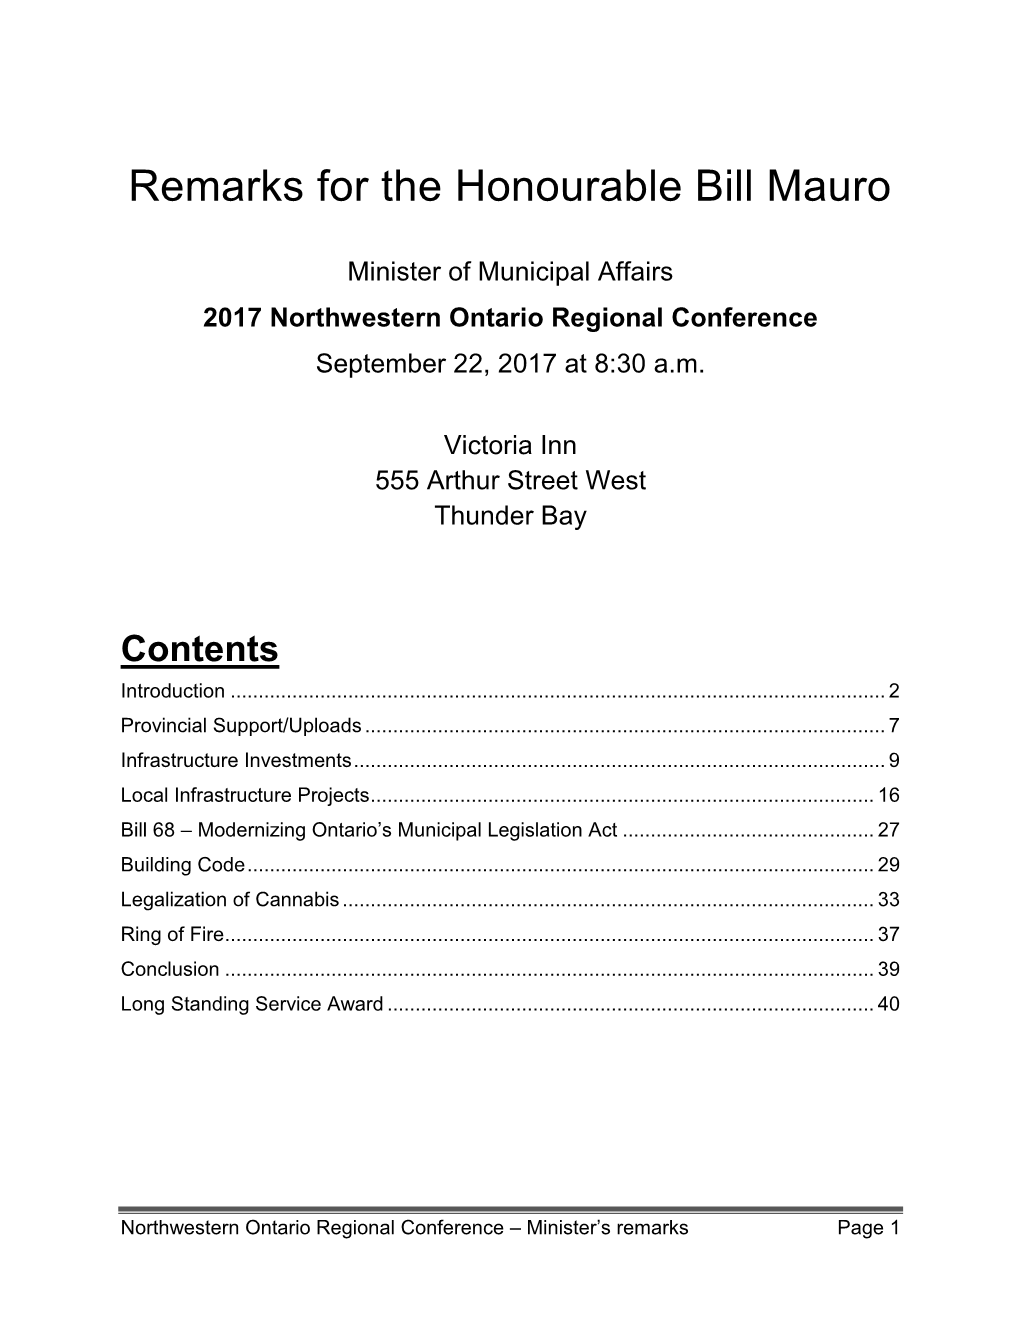 Remarks for the Honourable Bill Mauro